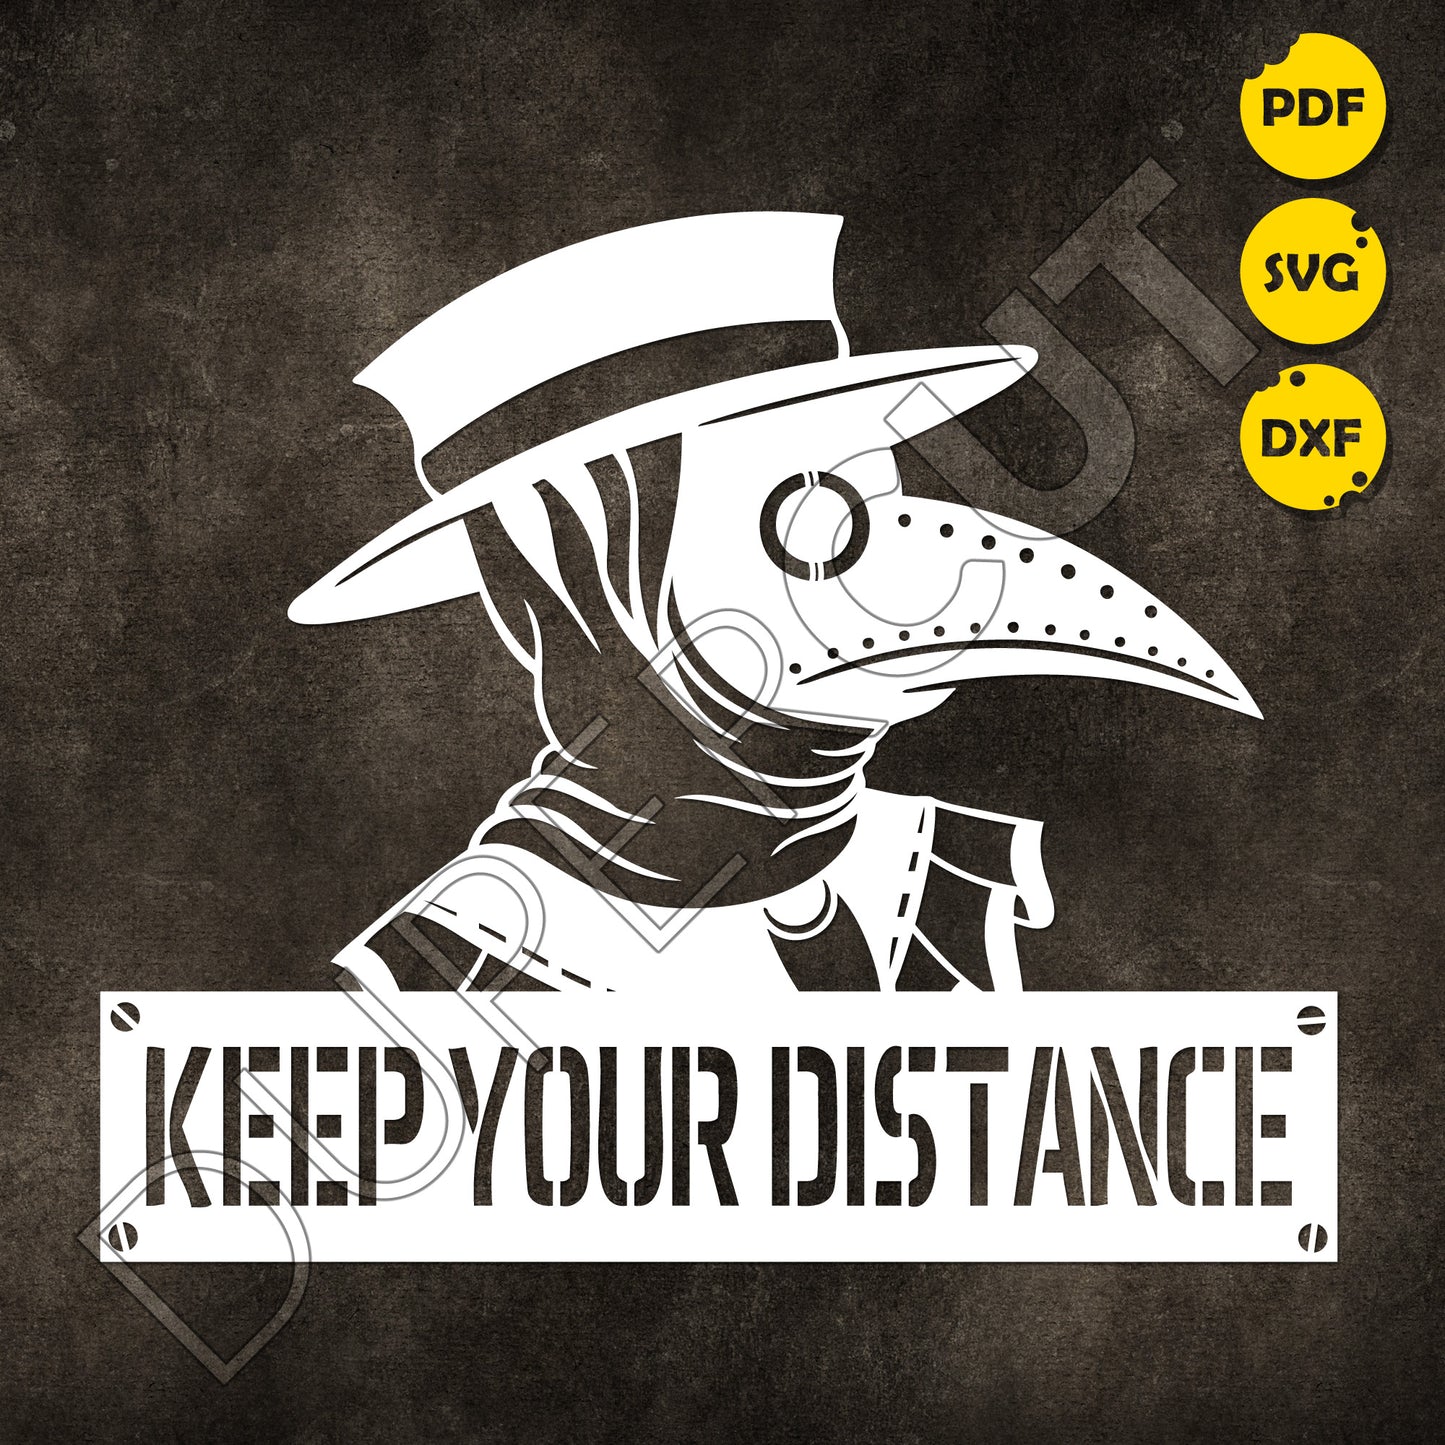 Plague doctor, Keep your distance sign. SVG PNG DXF files Paper cutting template for personal or commercial use. Vinyl template cutting files for Cricut, Glowforge, Silhouette, CNC